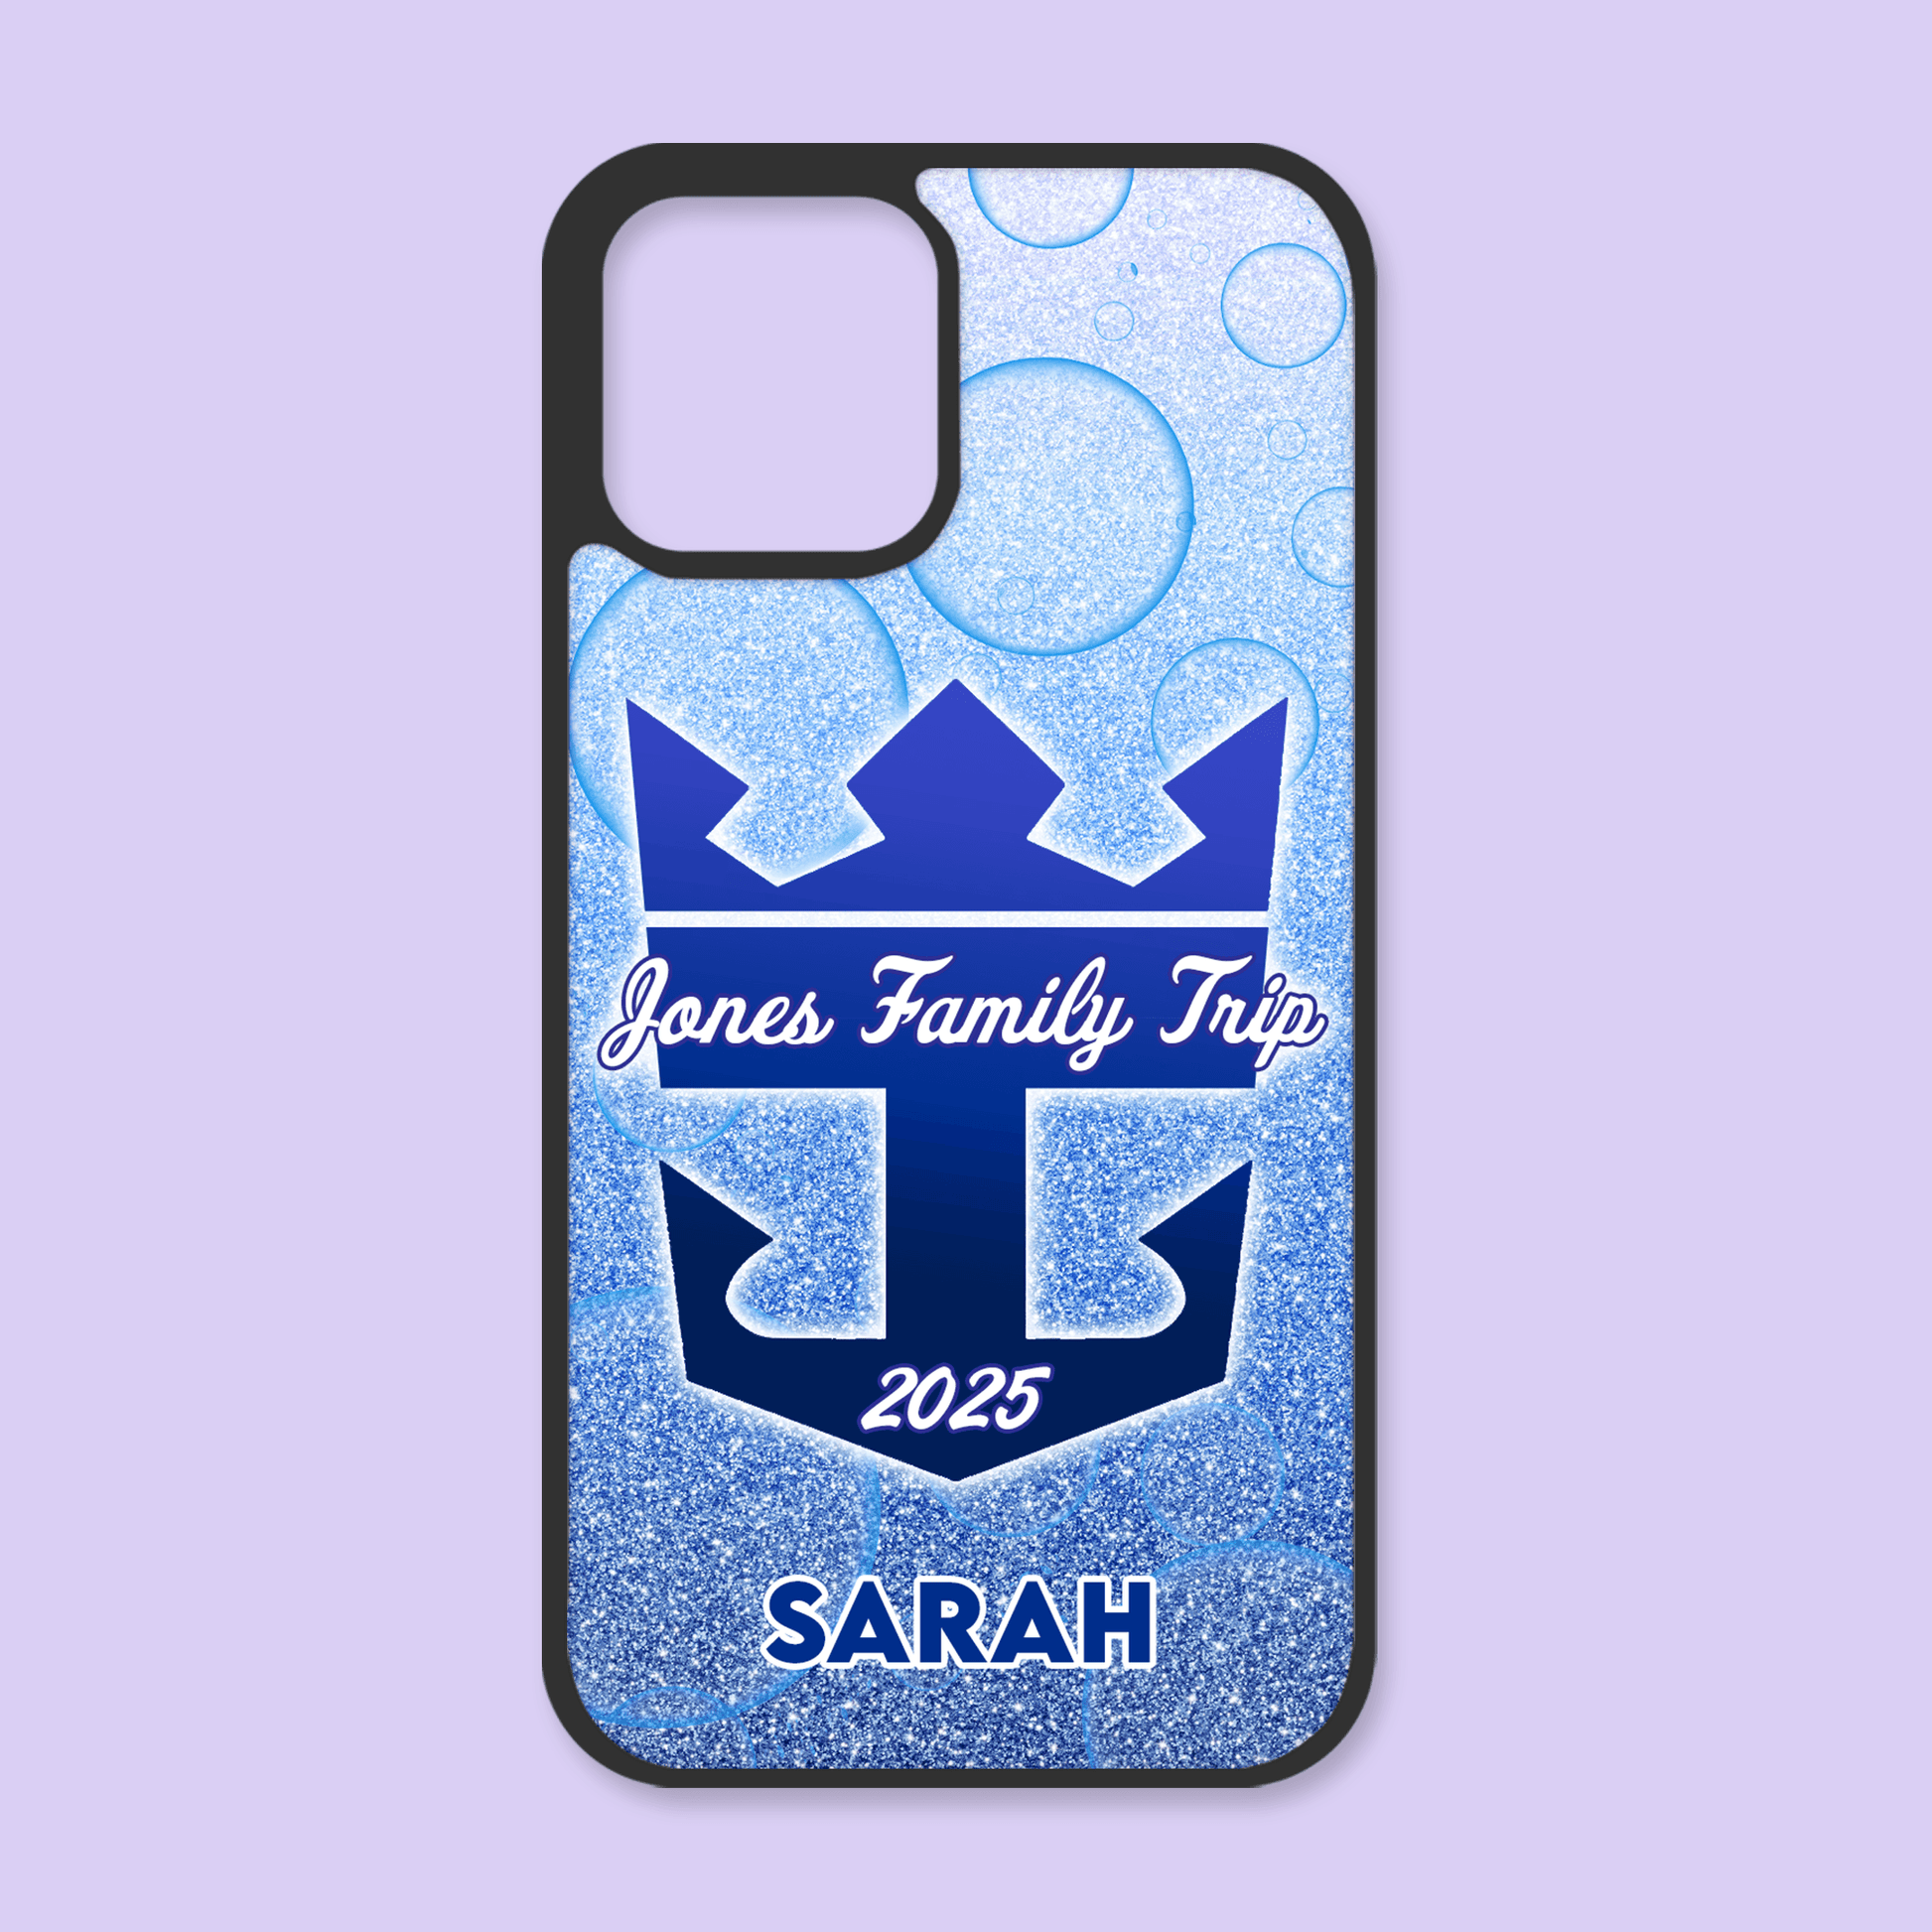 Royal Caribbean Personalized Phone Case - Two Crafty Gays